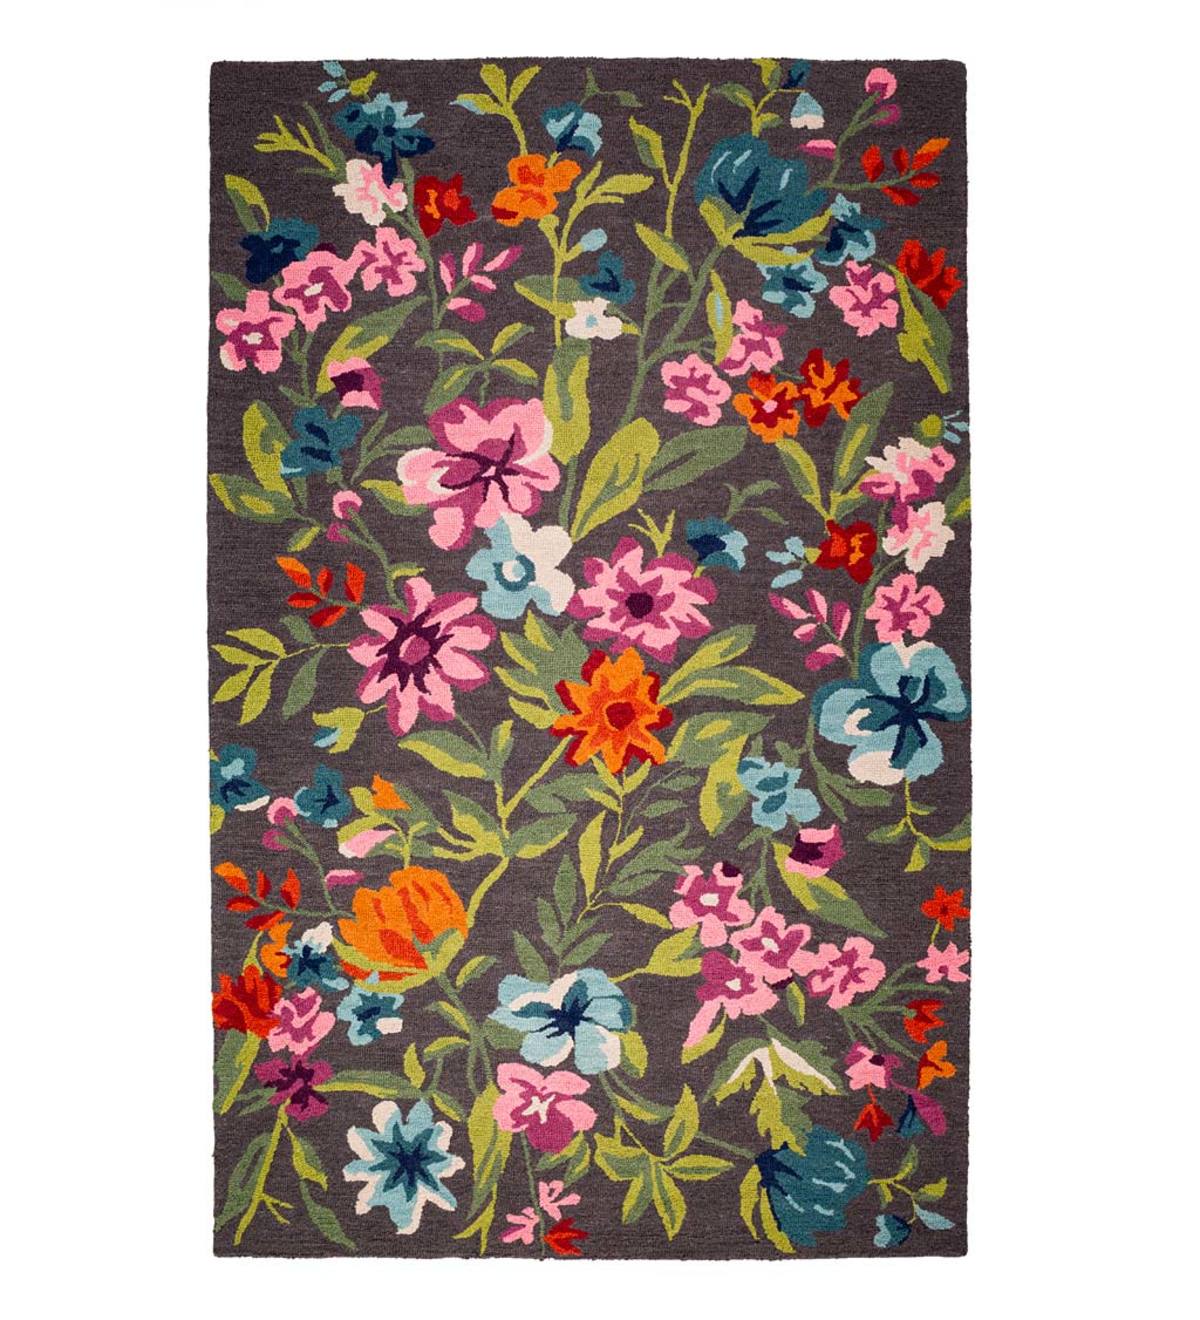 Belle Grove Hand-Tufted Wool Floral Area Rug